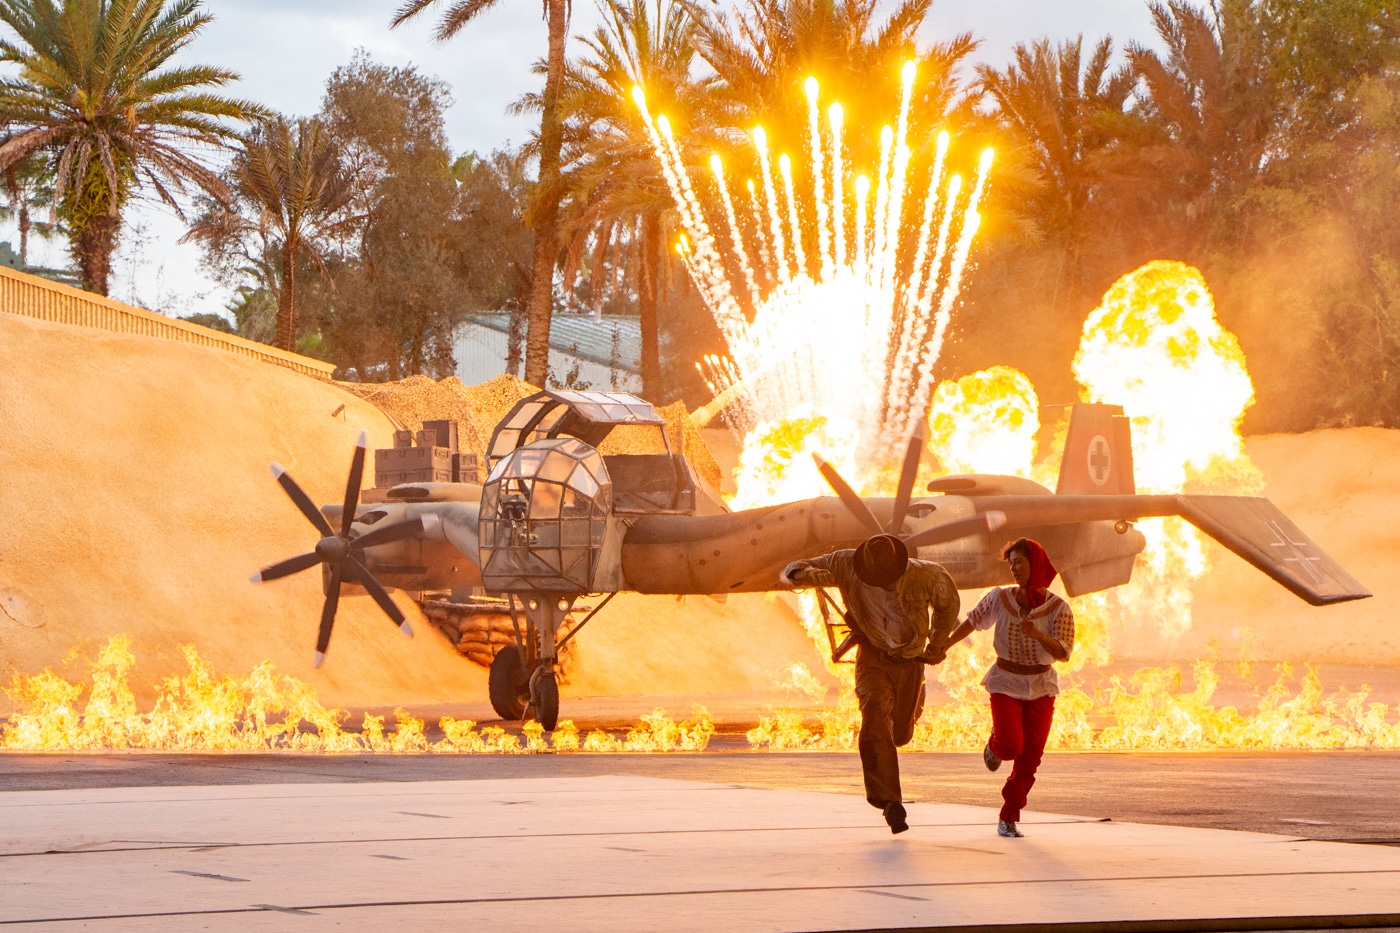 german flying wing from indiana jones epic stunt spectacular